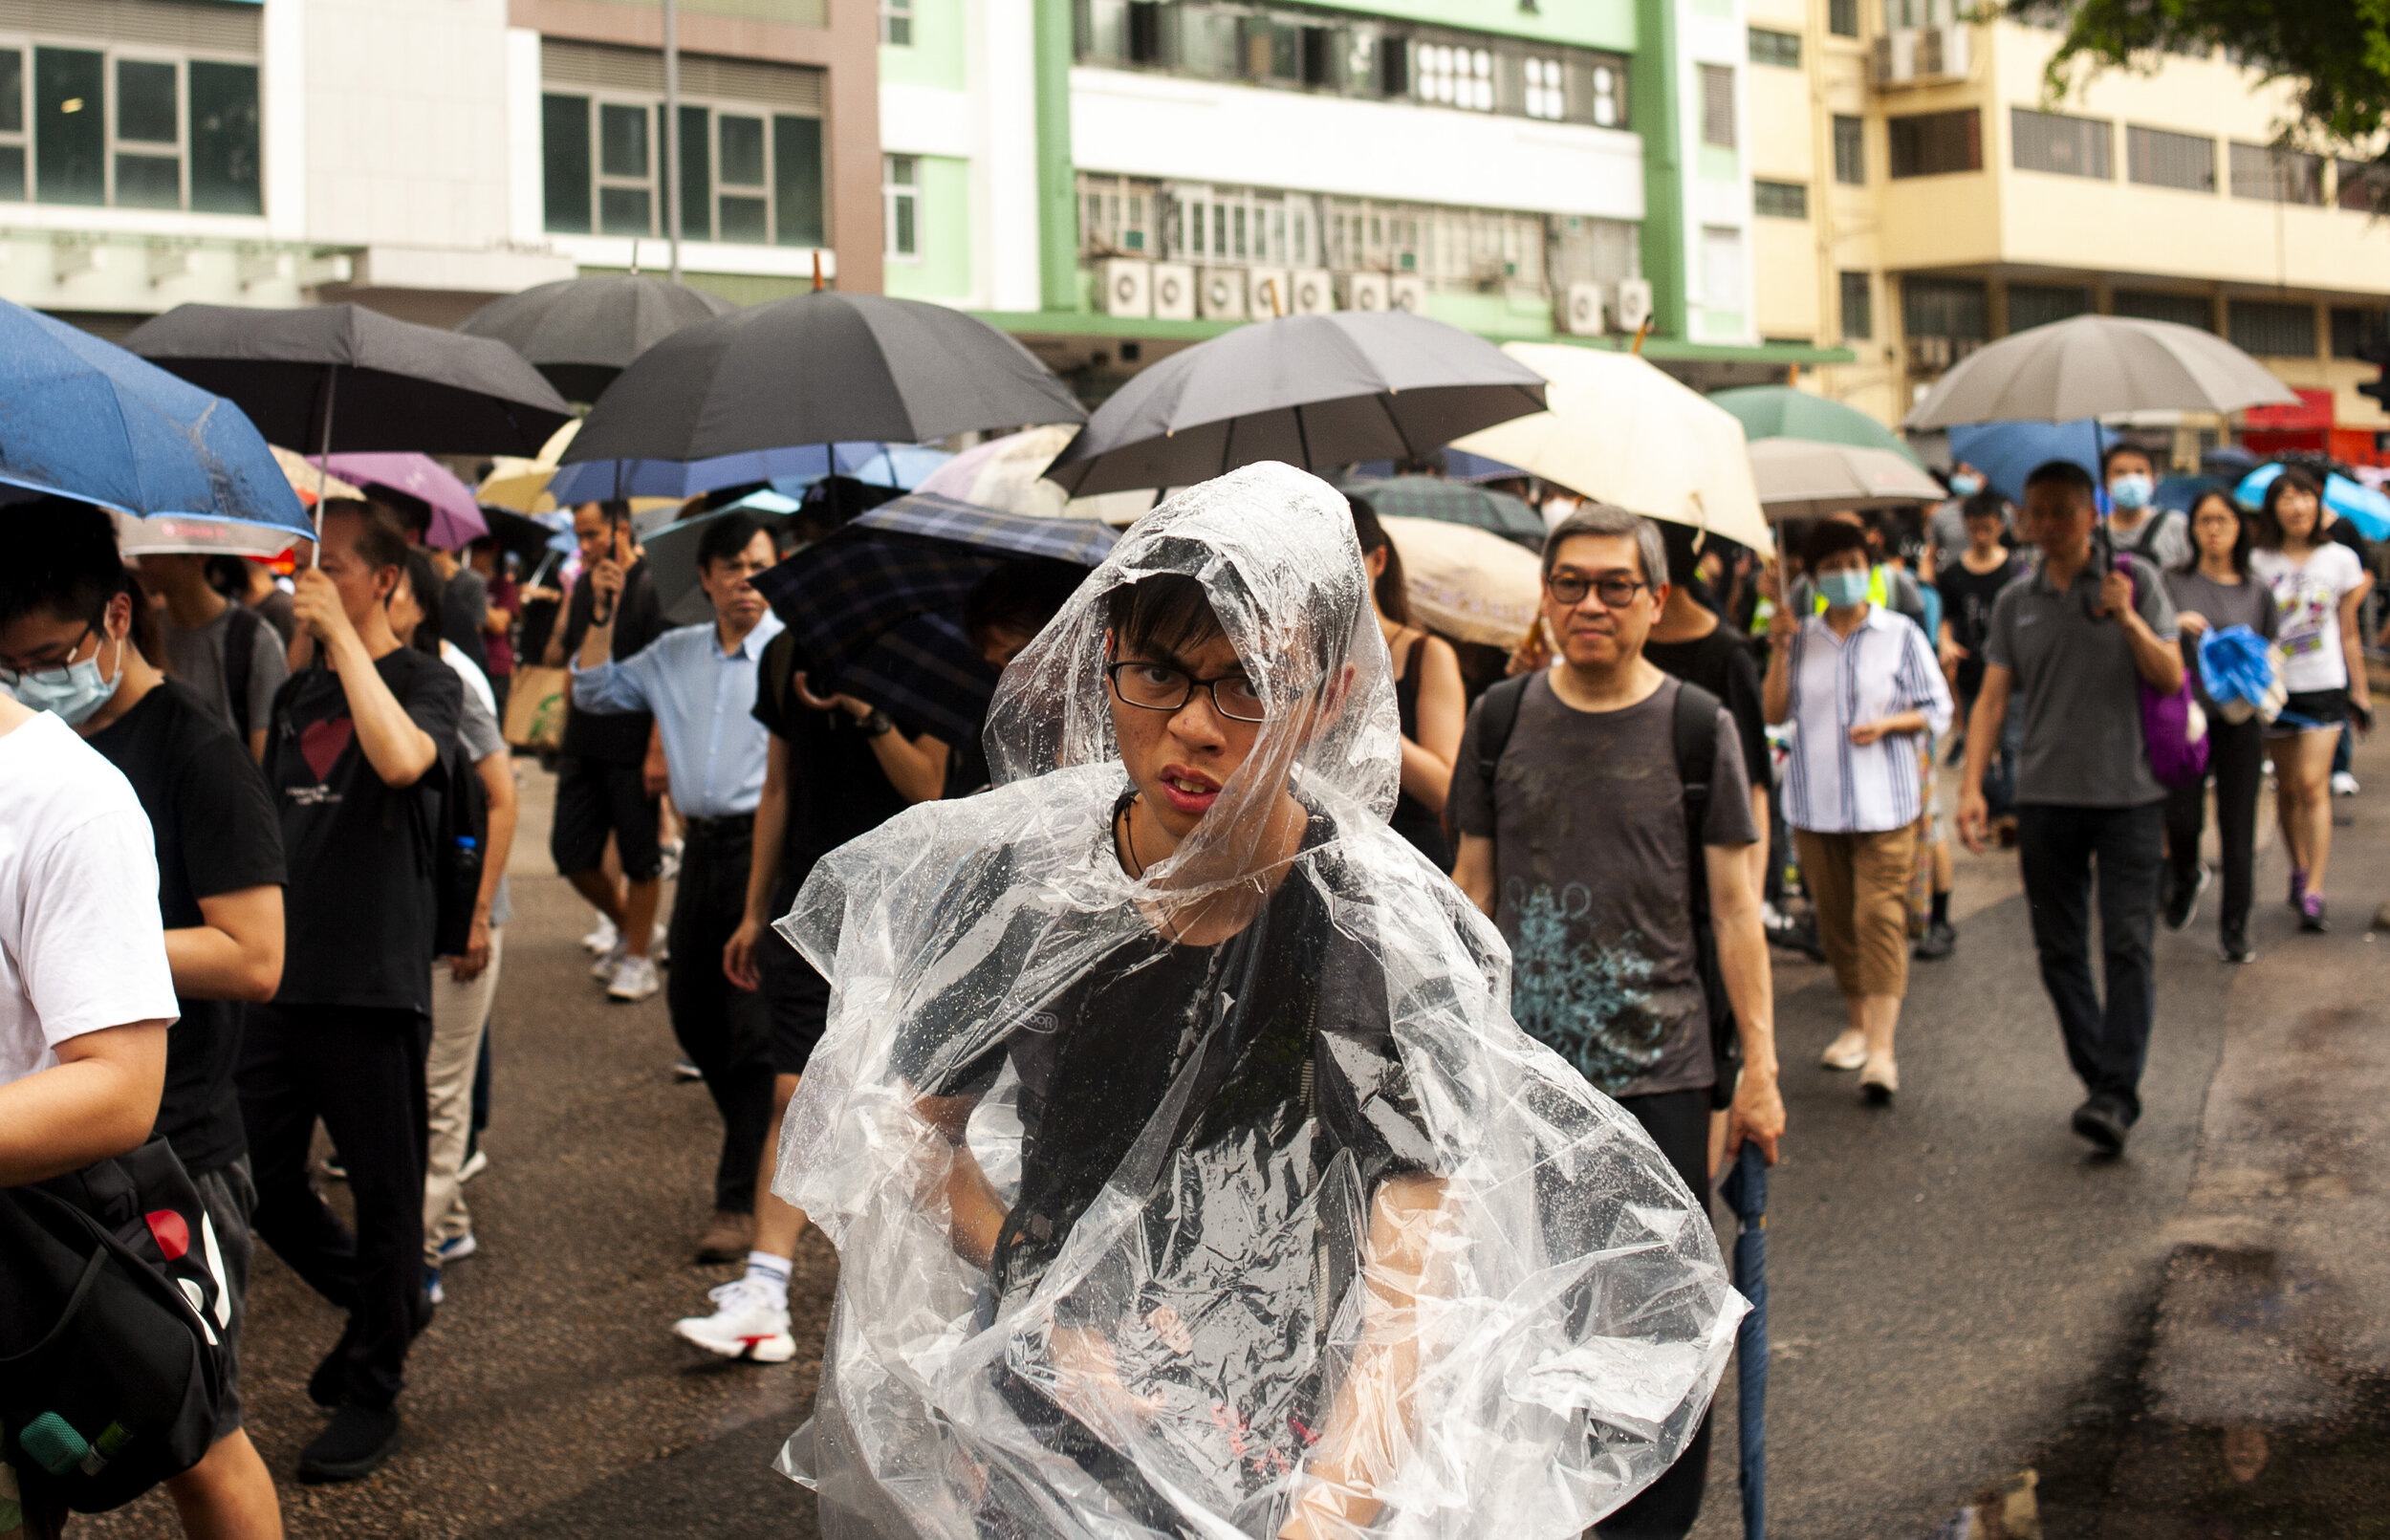  A pro-democracy protester marches with thousands of other protesters during a teacher’s march in Hung Hom against the extradition bill on August 17, 2019. Protesters shouted at police officers who lingered in vans nearby however, the police and prot